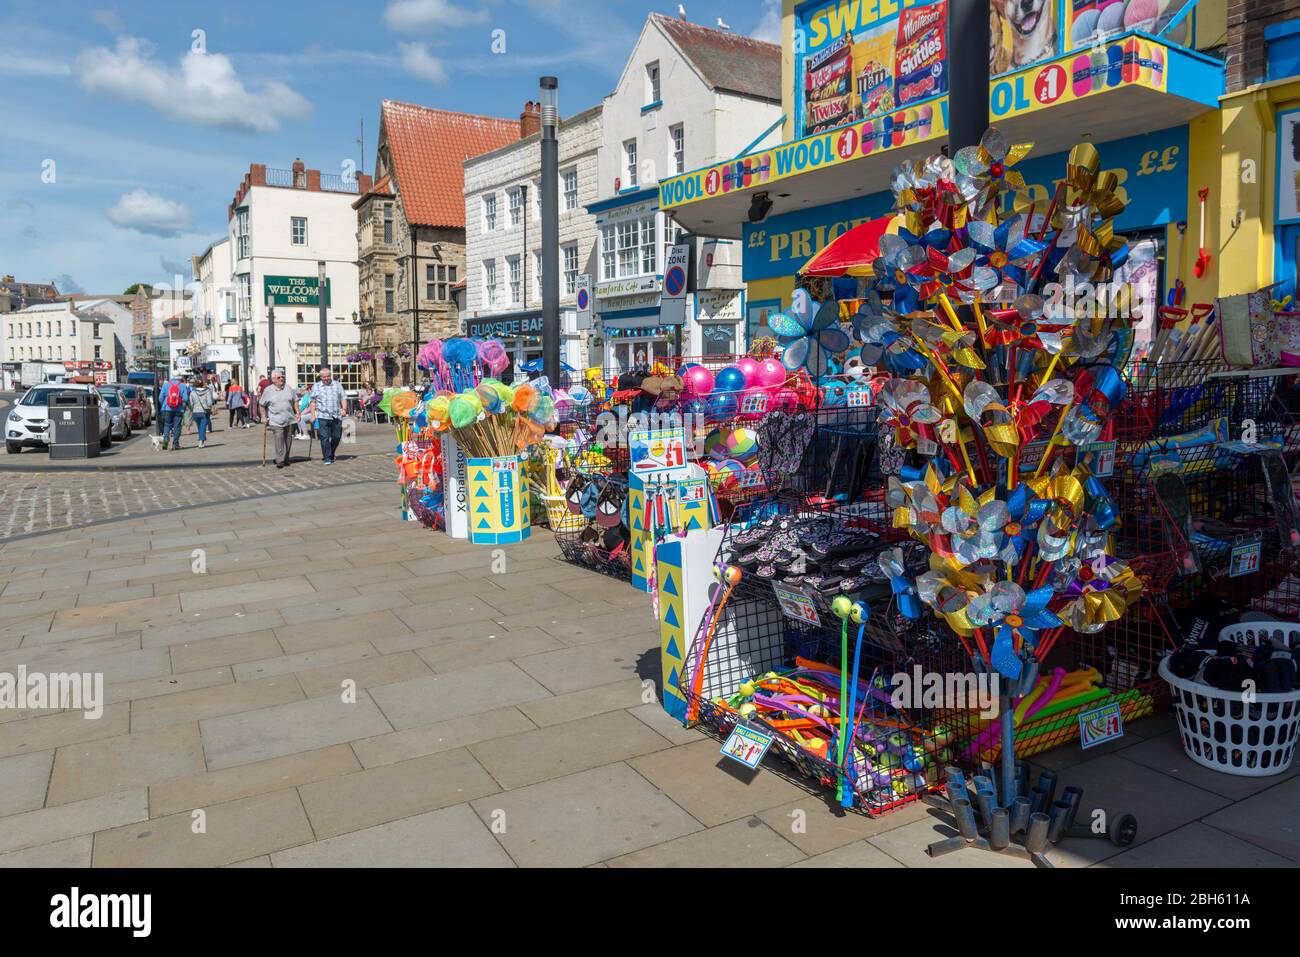 Display outside a shop selling colourful beach goods on Sandside, near the harbour in Scarbrough, North Yorkshire Stock Photo